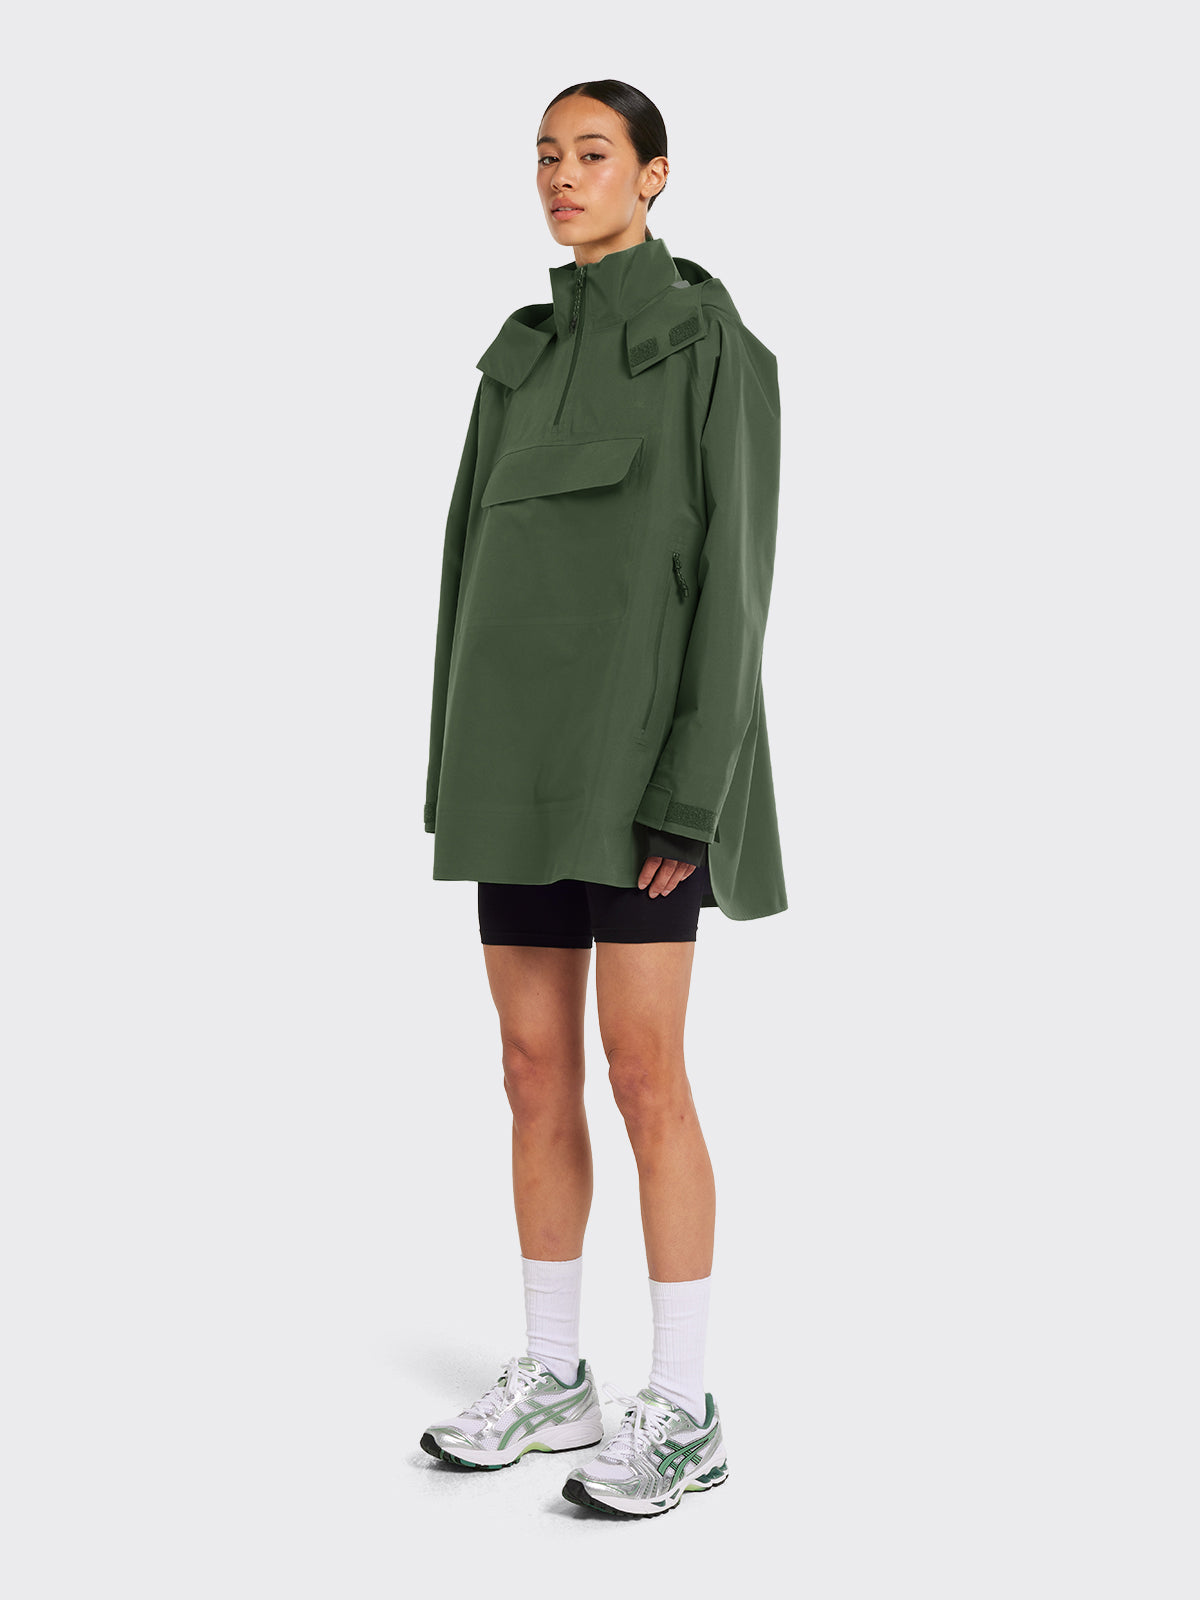 Woman wearing Voss poncho in Dusty Green from Blæst